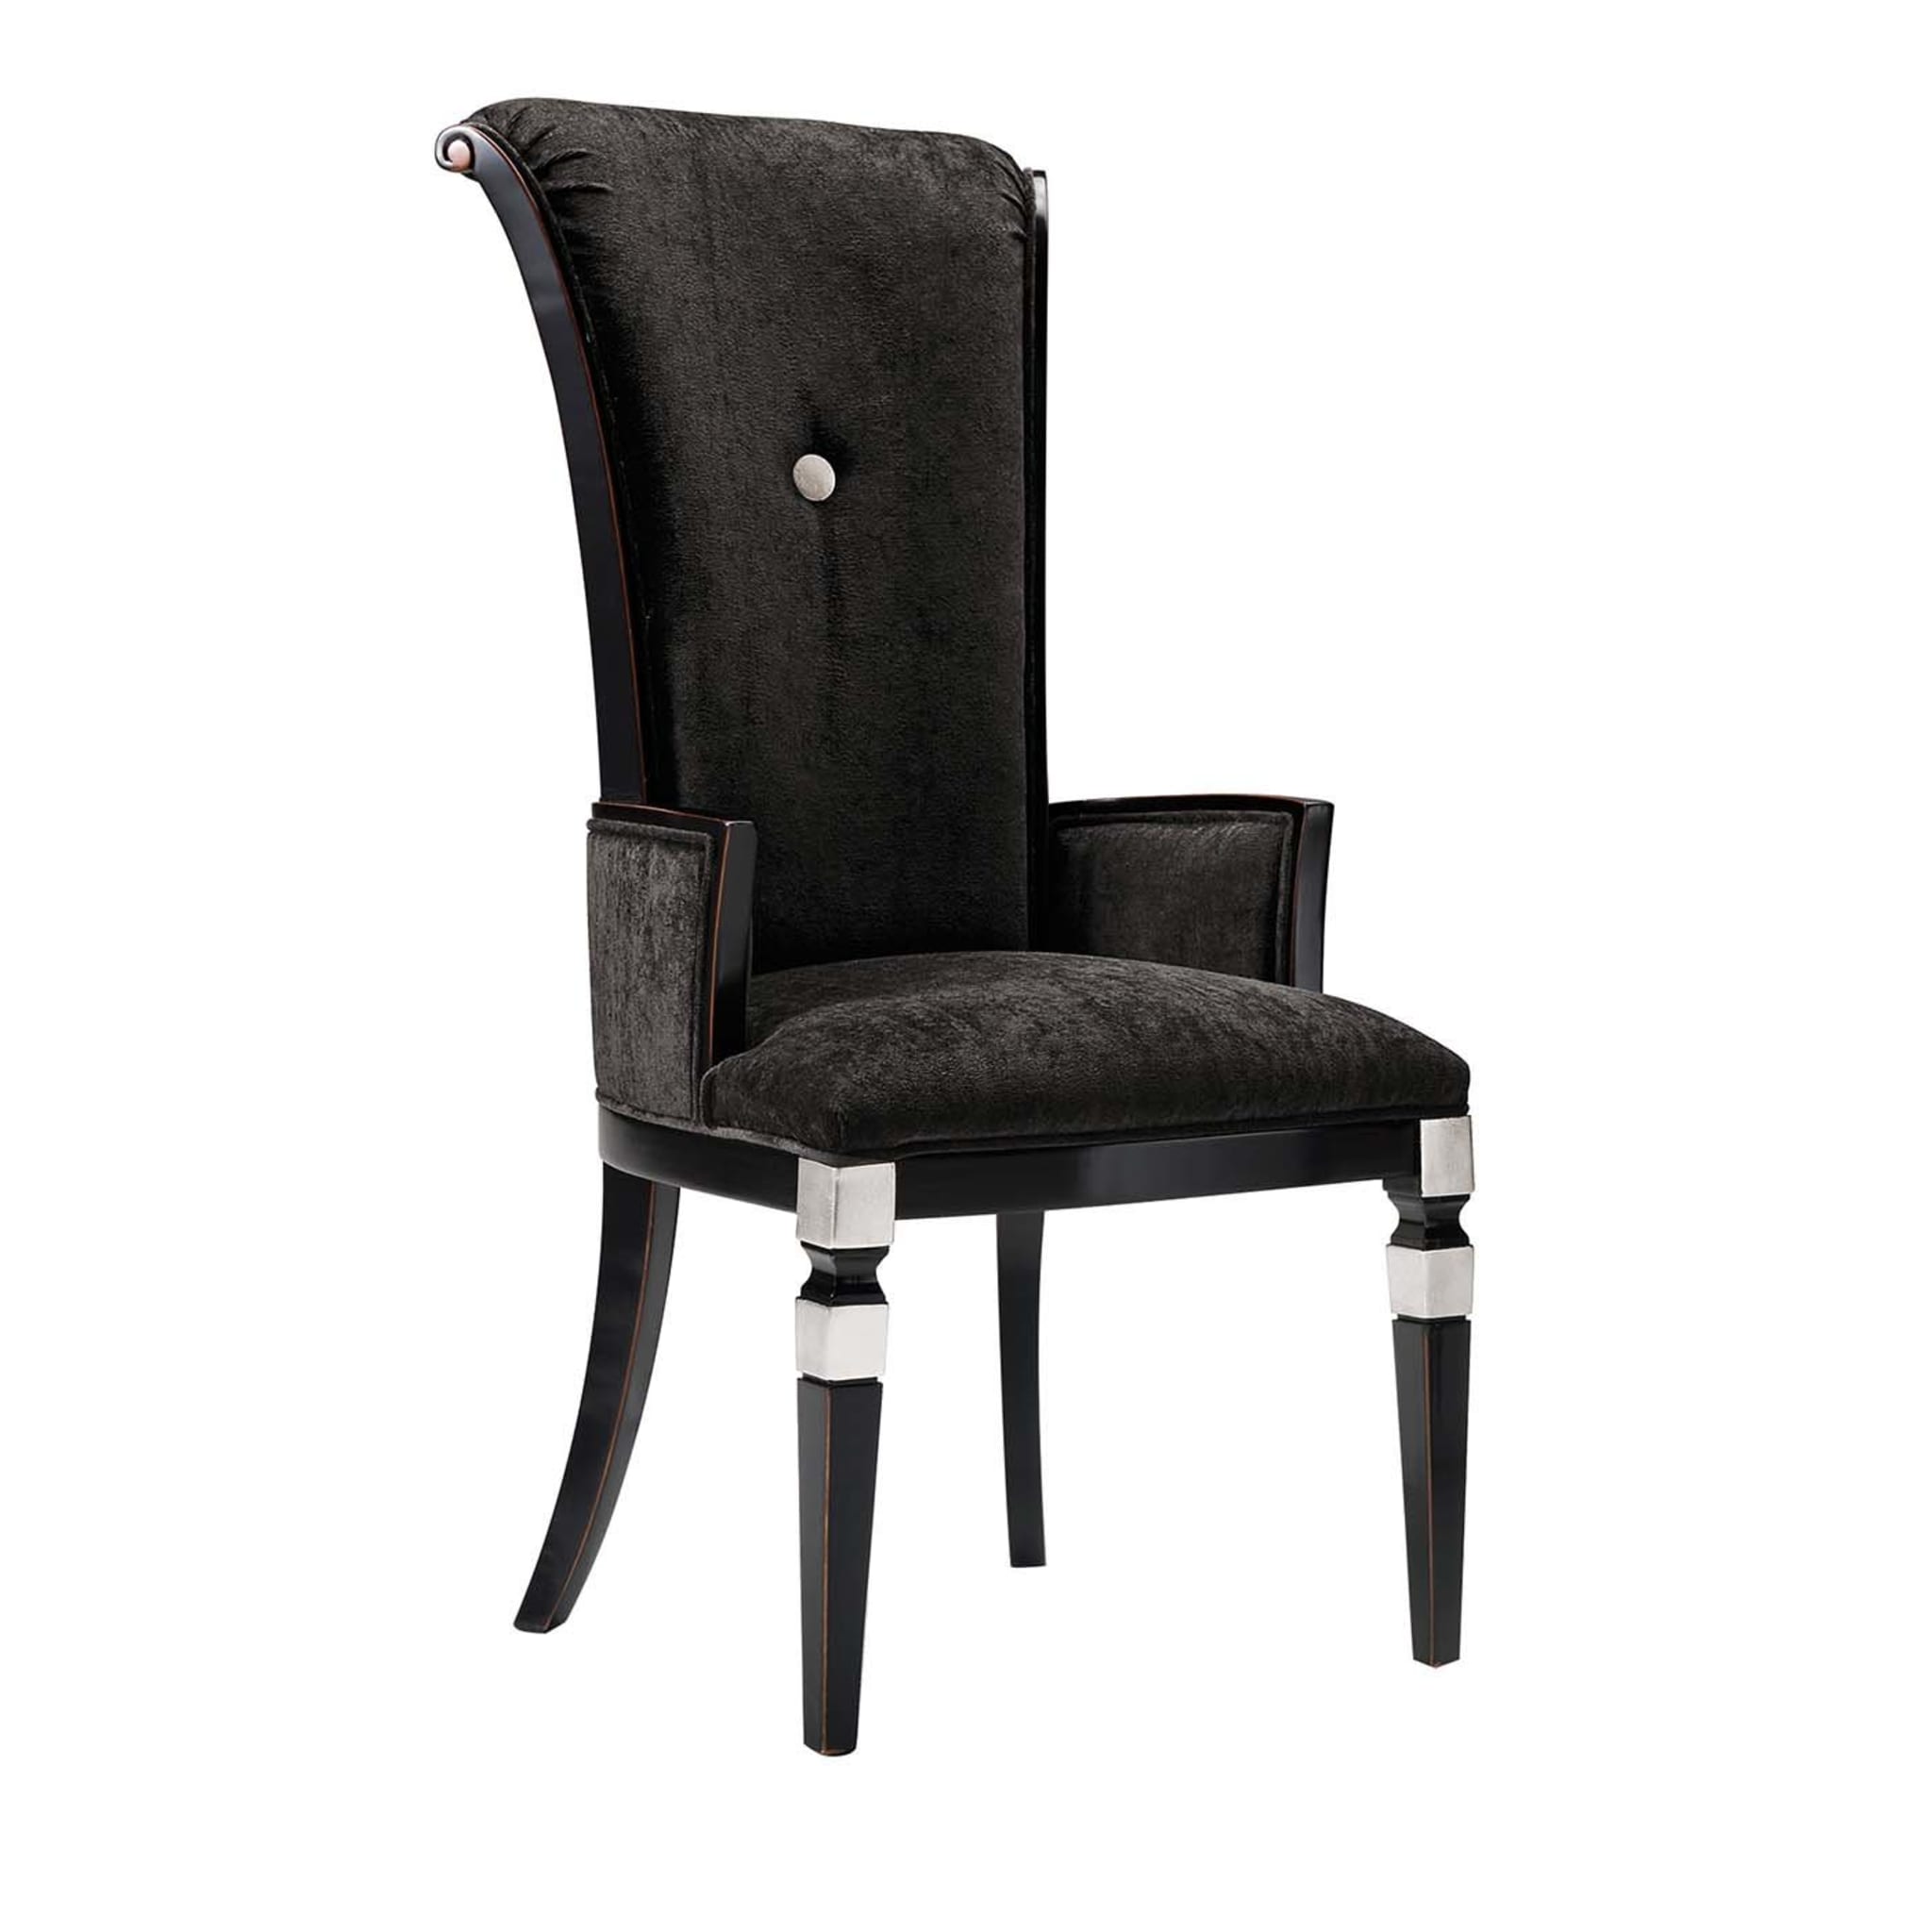 Grignani Black Dining Chair - Main view